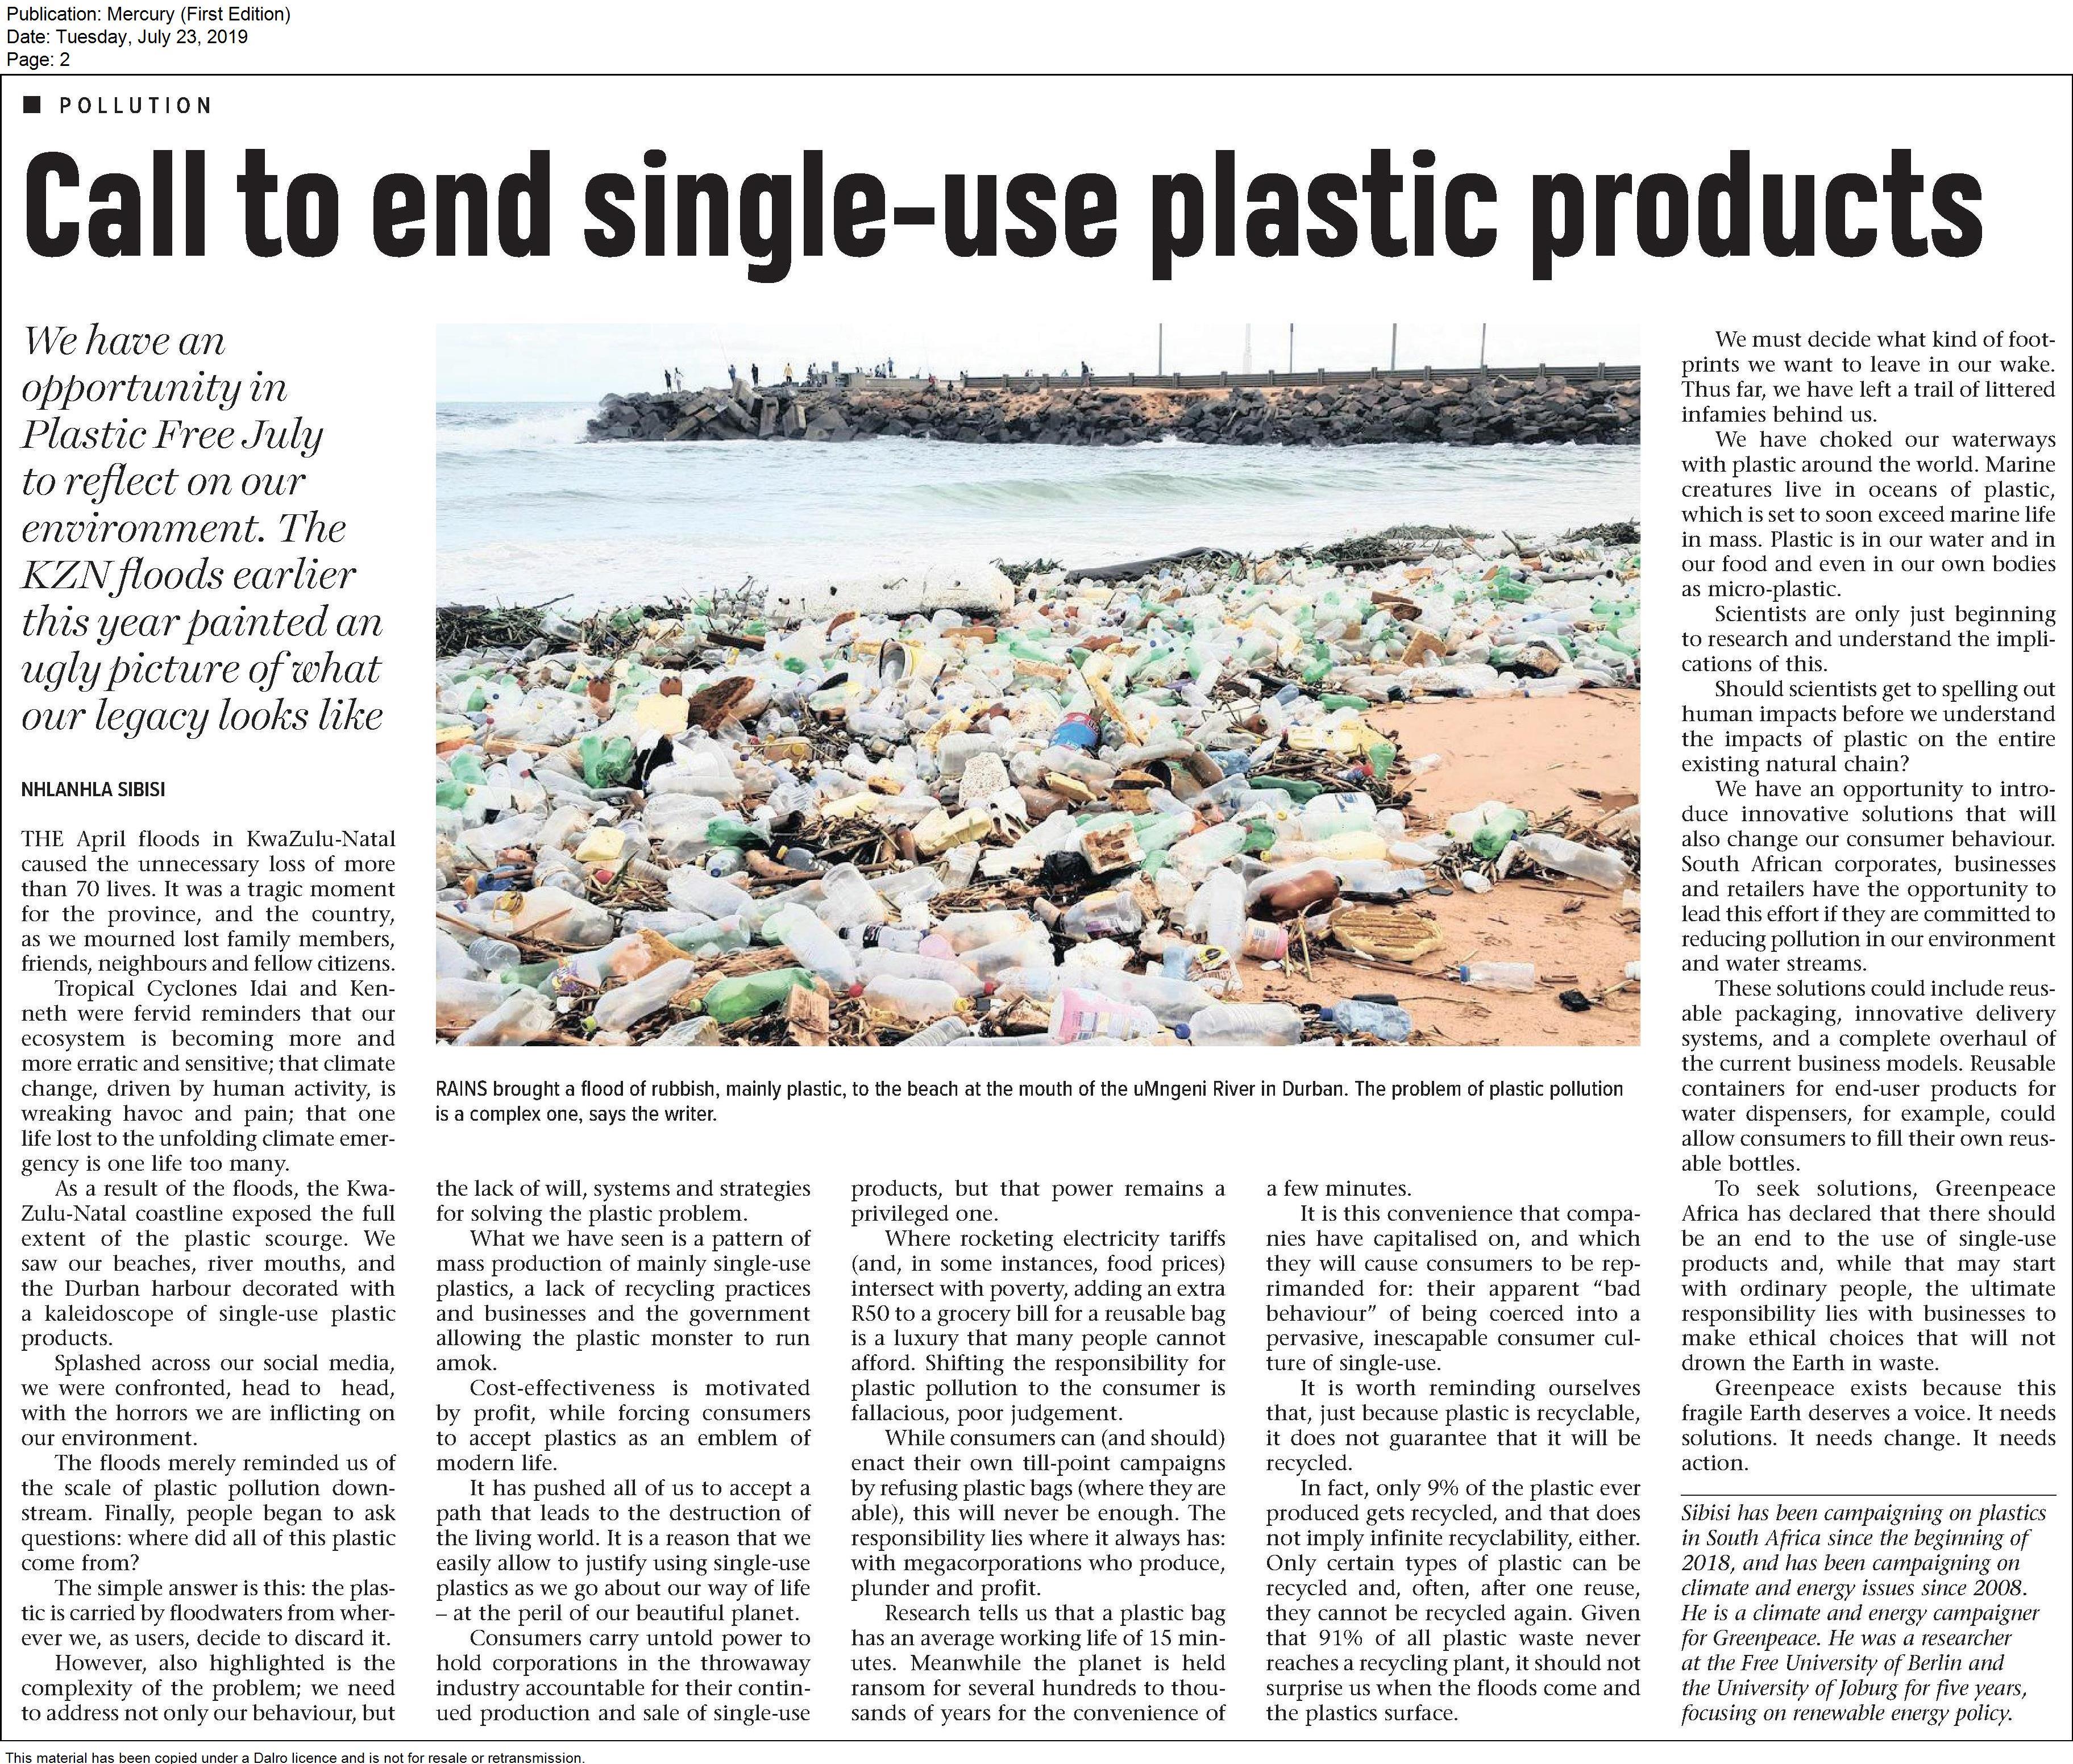 The plastic tragedy demands an end to single-use plastic ...